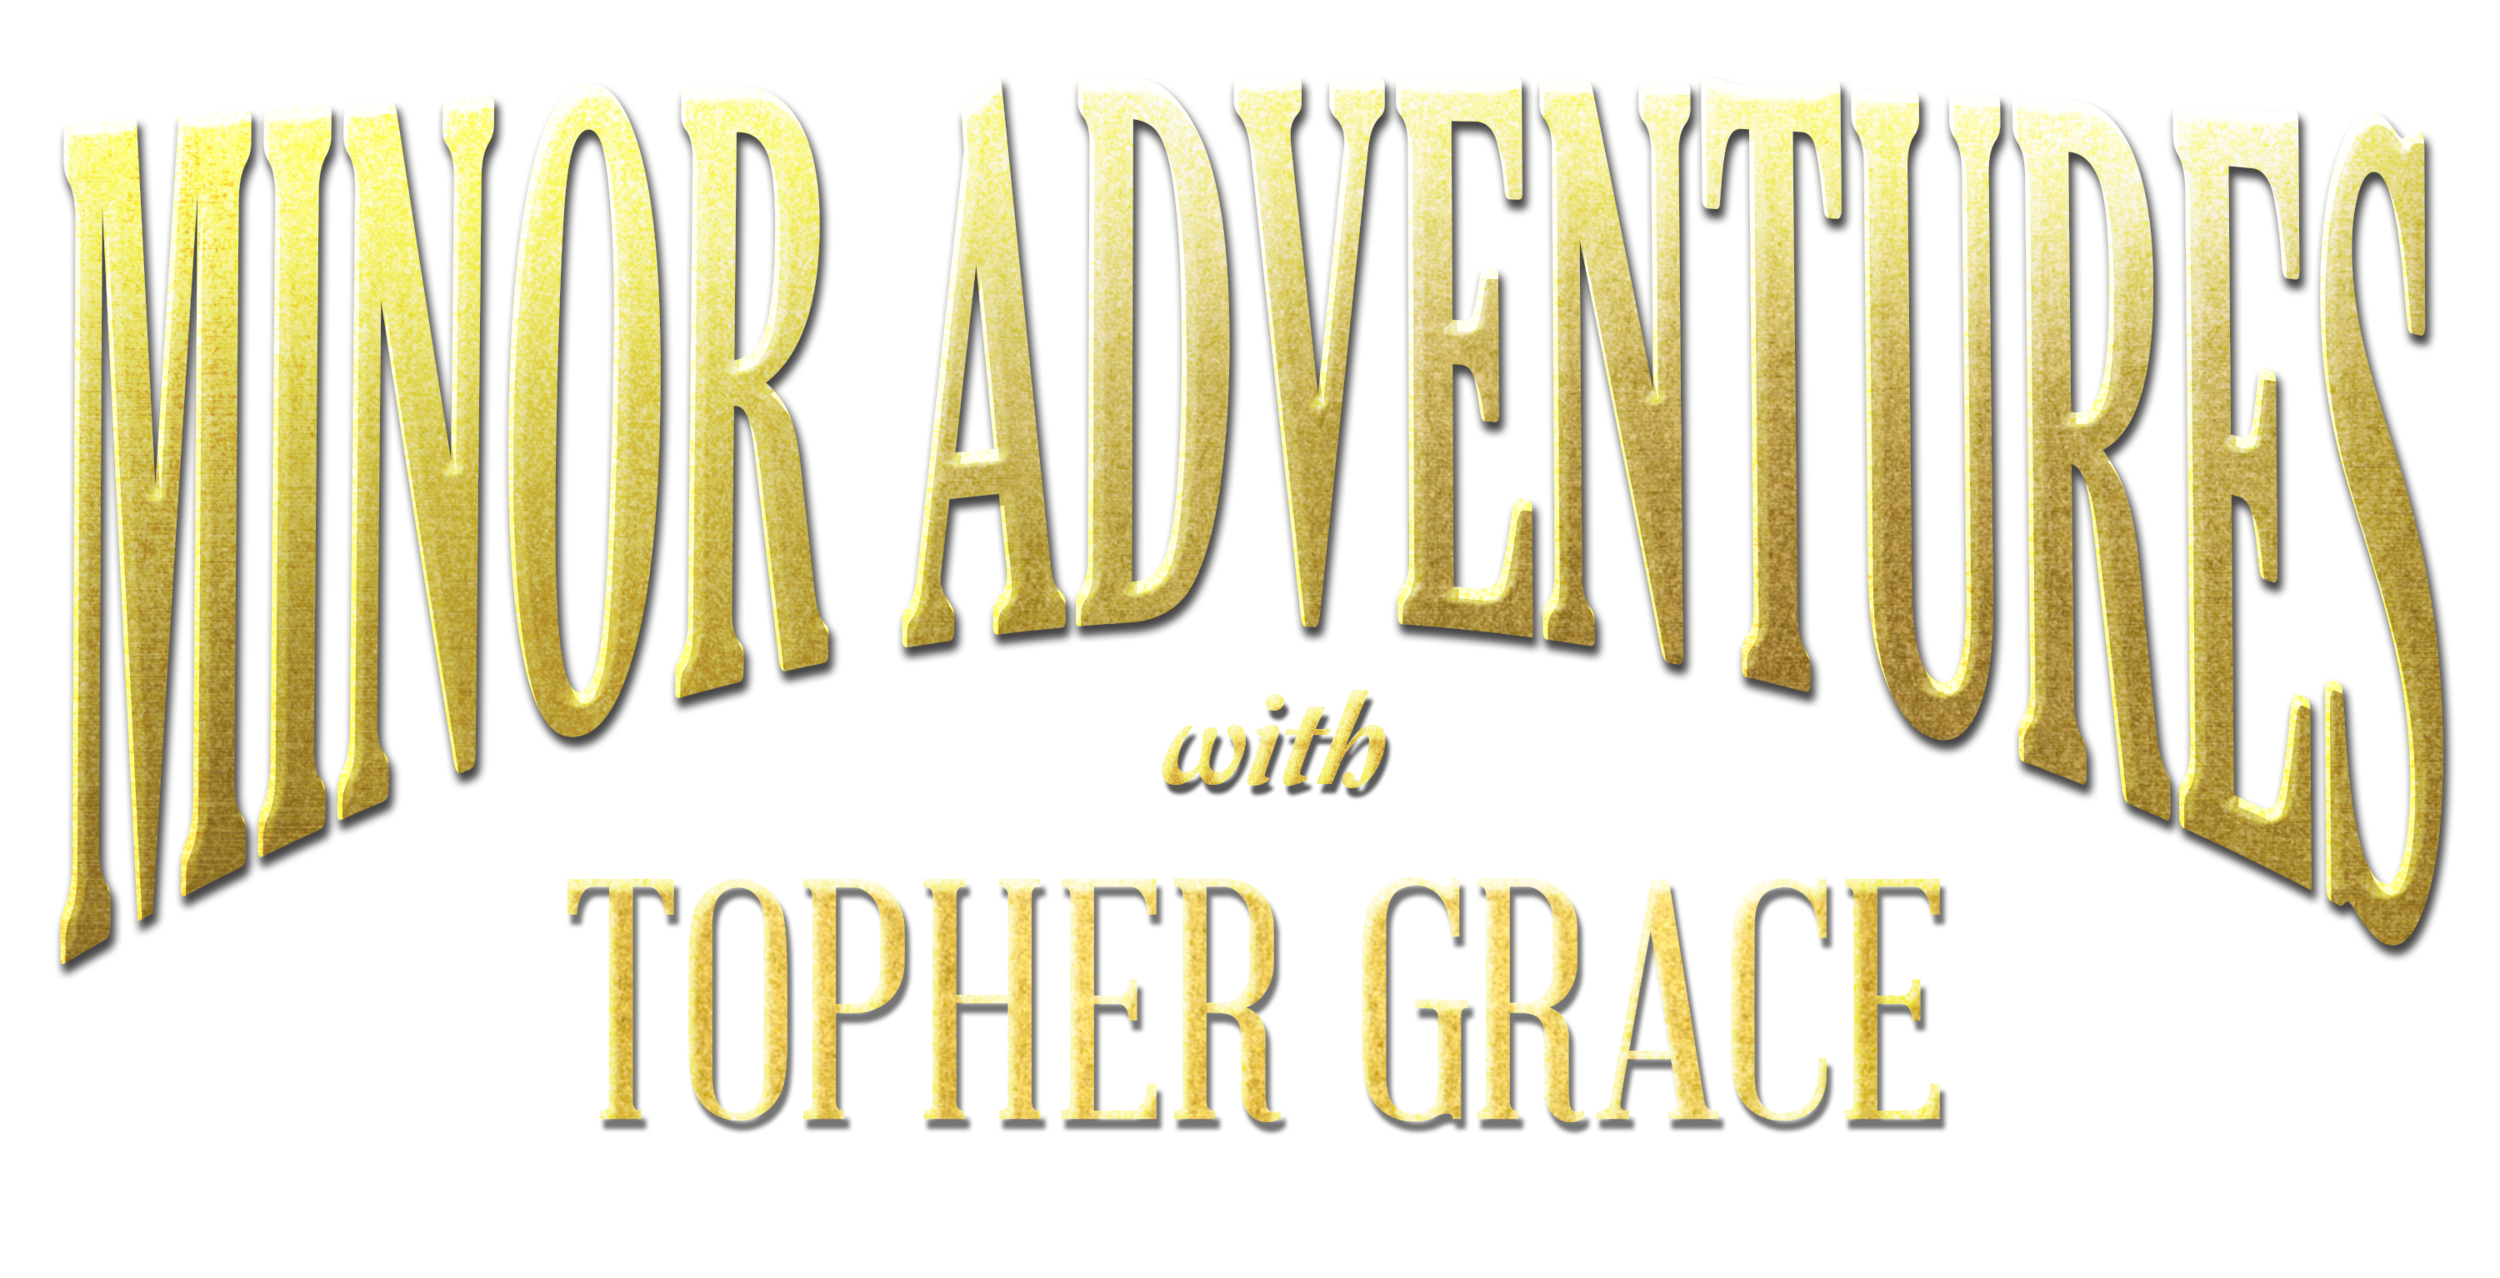 Minor Adventures with Topher Grace